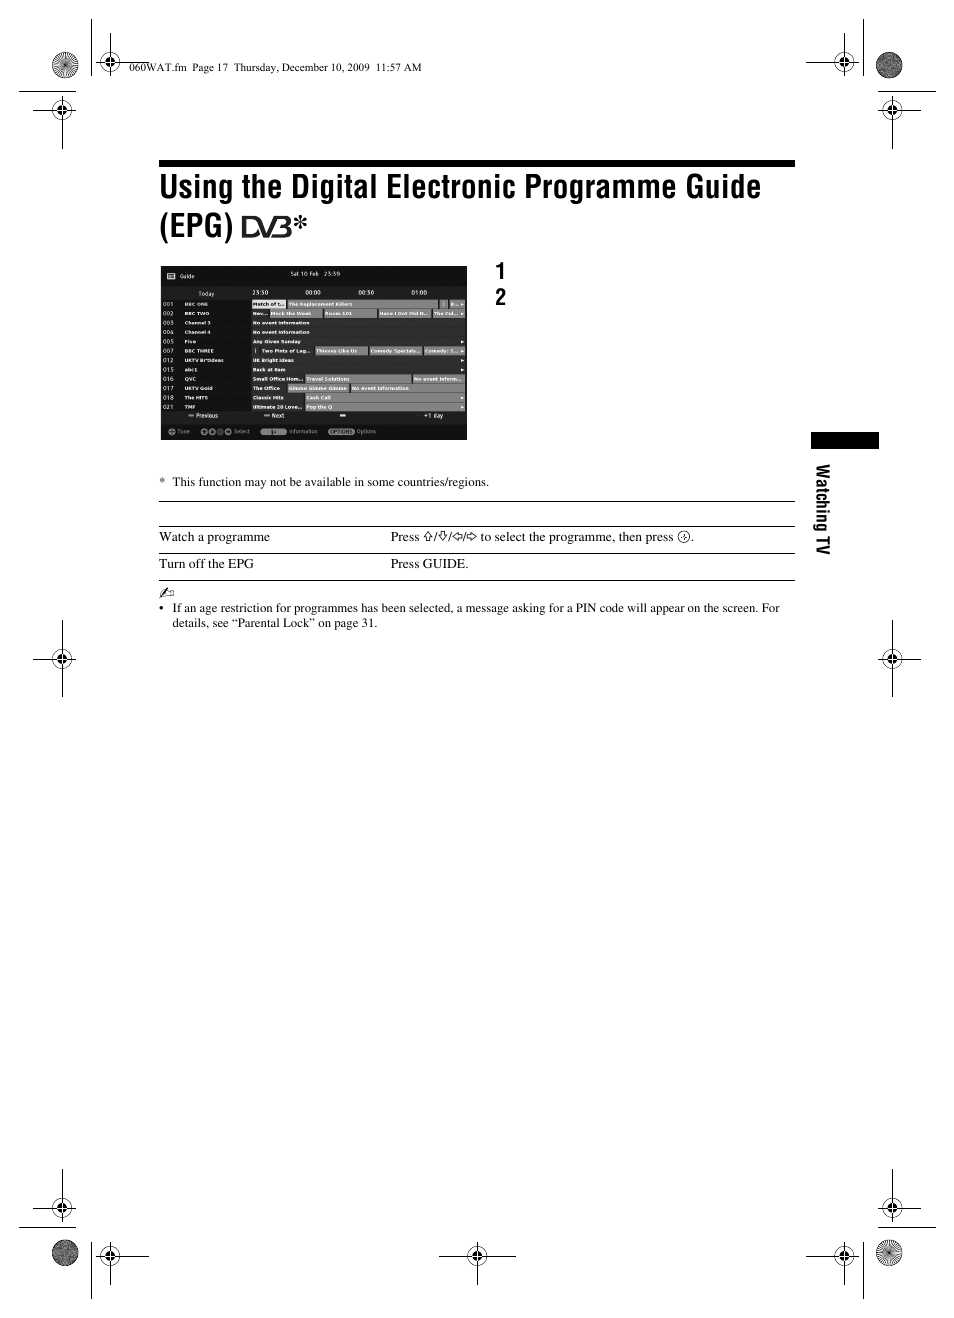 Using the digital electronic programme guide (epg) | Sony BRAVIA KDL-22EX3xx User Manual | Page 17 / 39